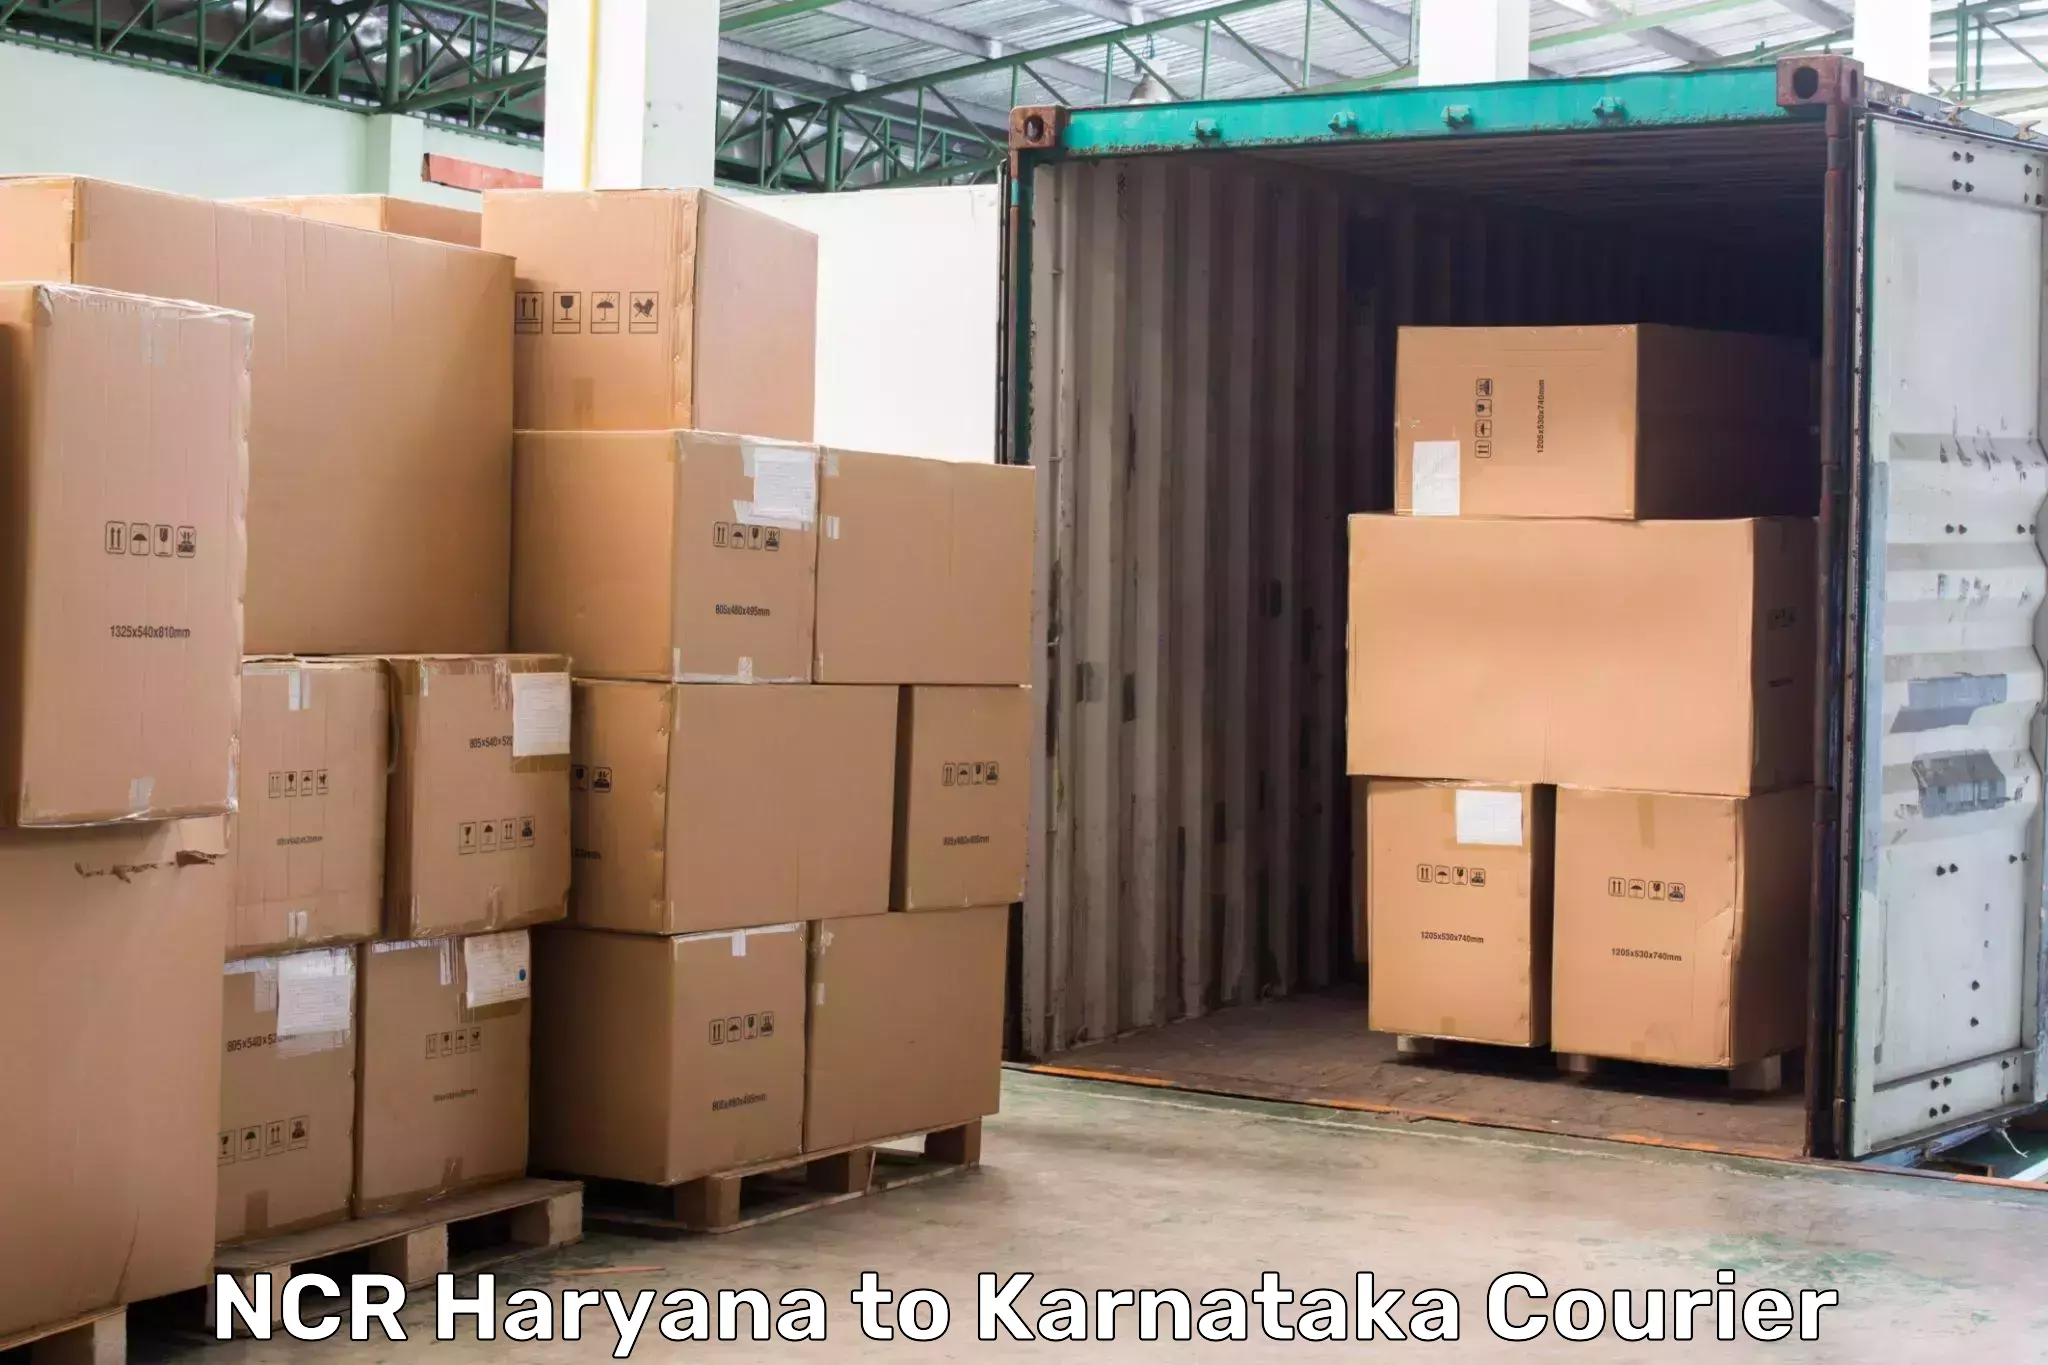 24/7 courier service NCR Haryana to Bhatkal